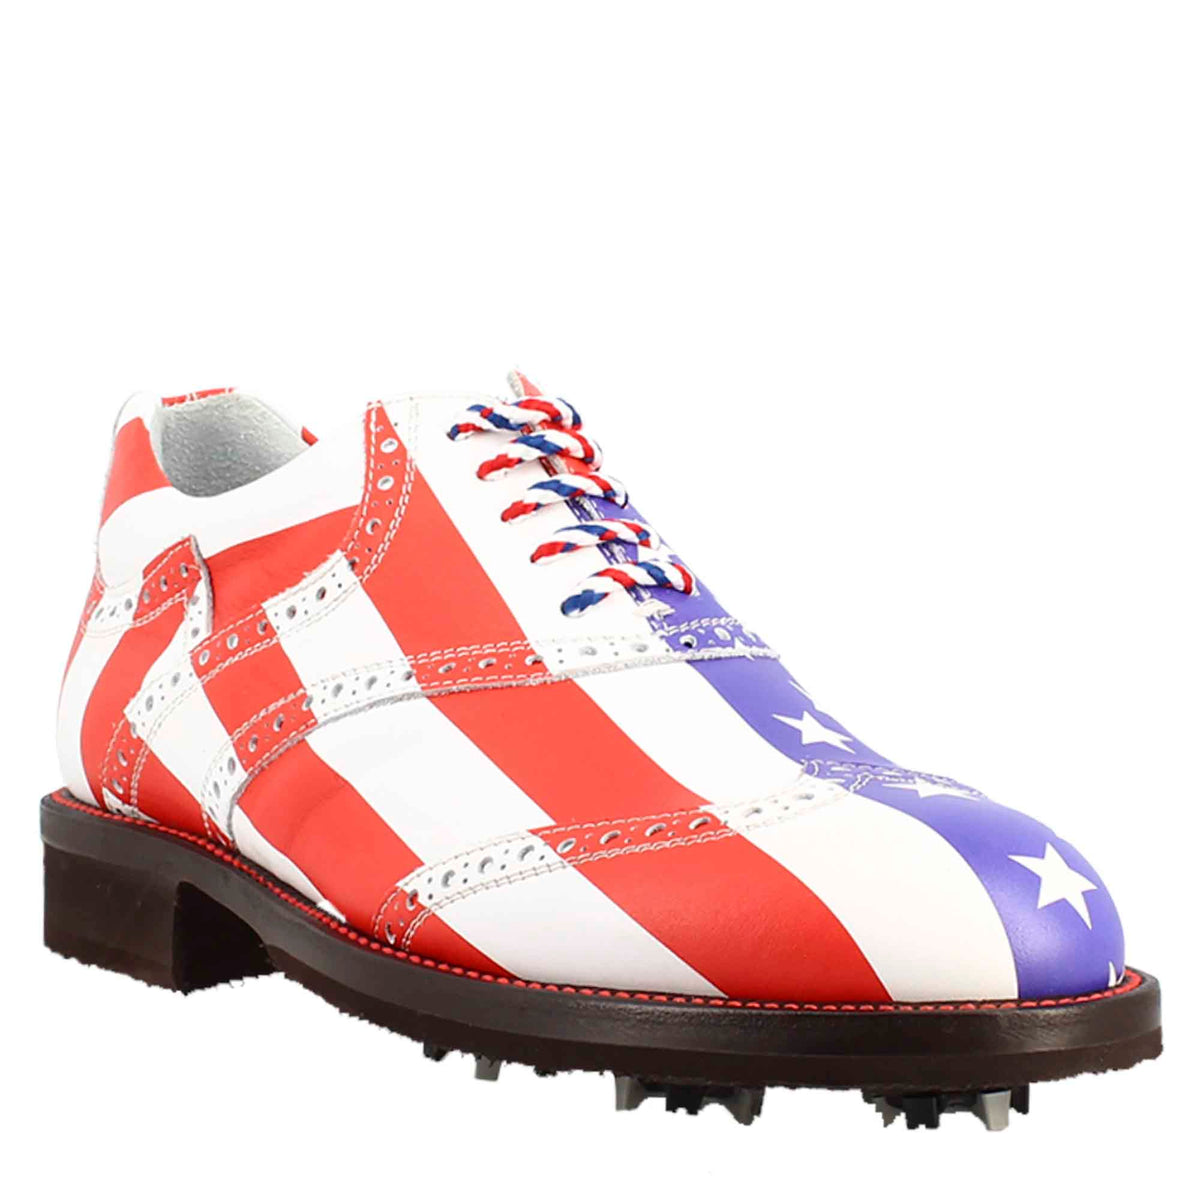 Women's blue red and white brogue details handcrafted leather golf shoes